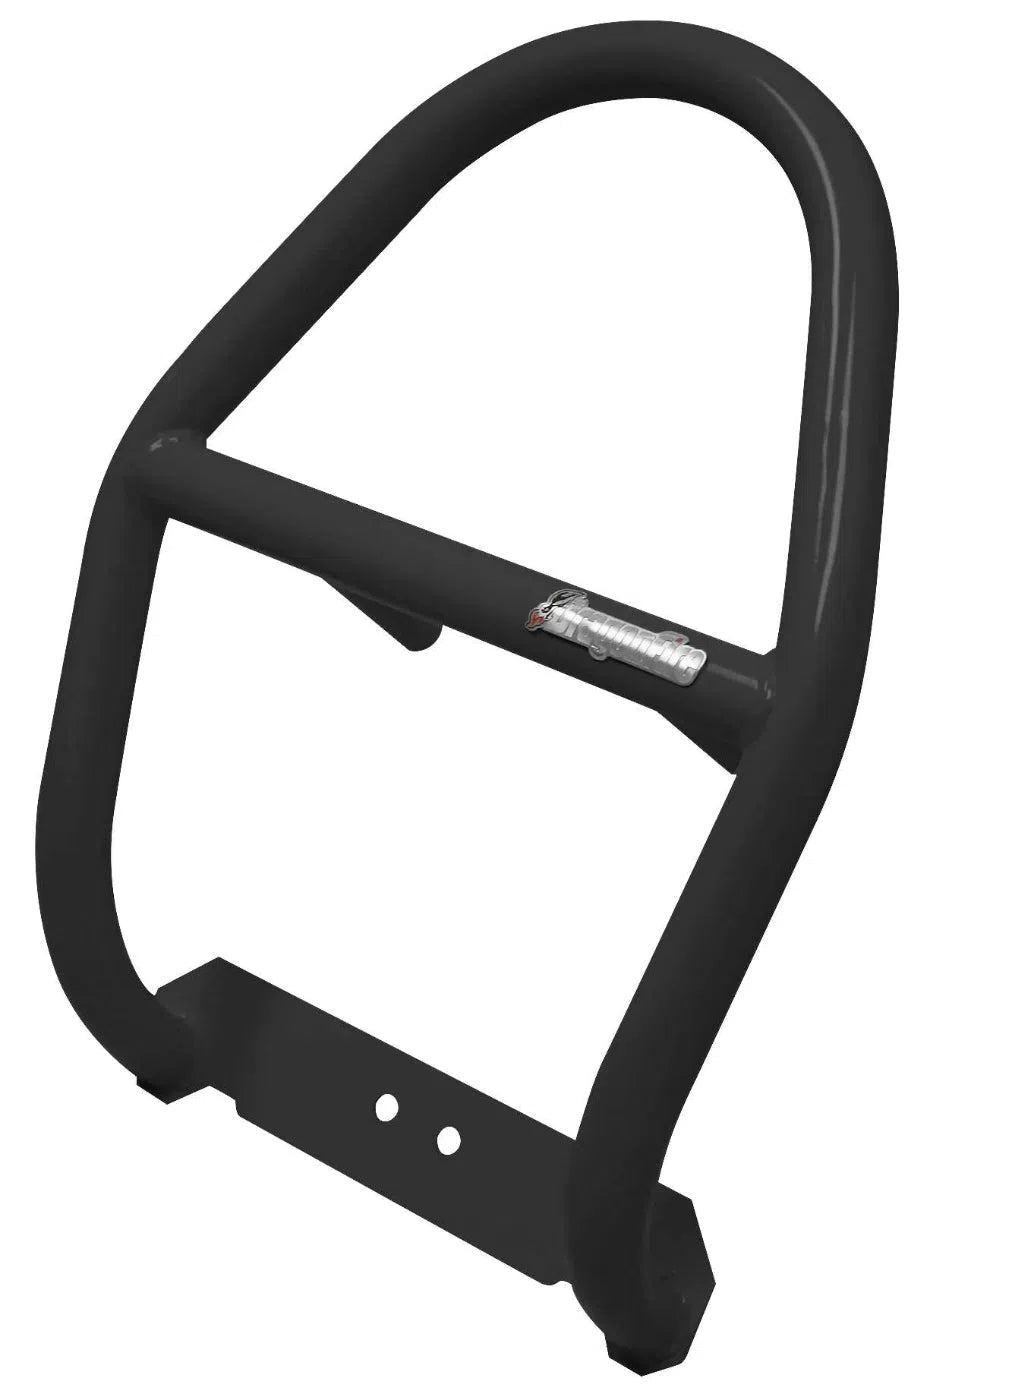 DragonFire Racing Strike Front Bumper for RZR XP1000 and RZR 900 Models - 01-1130